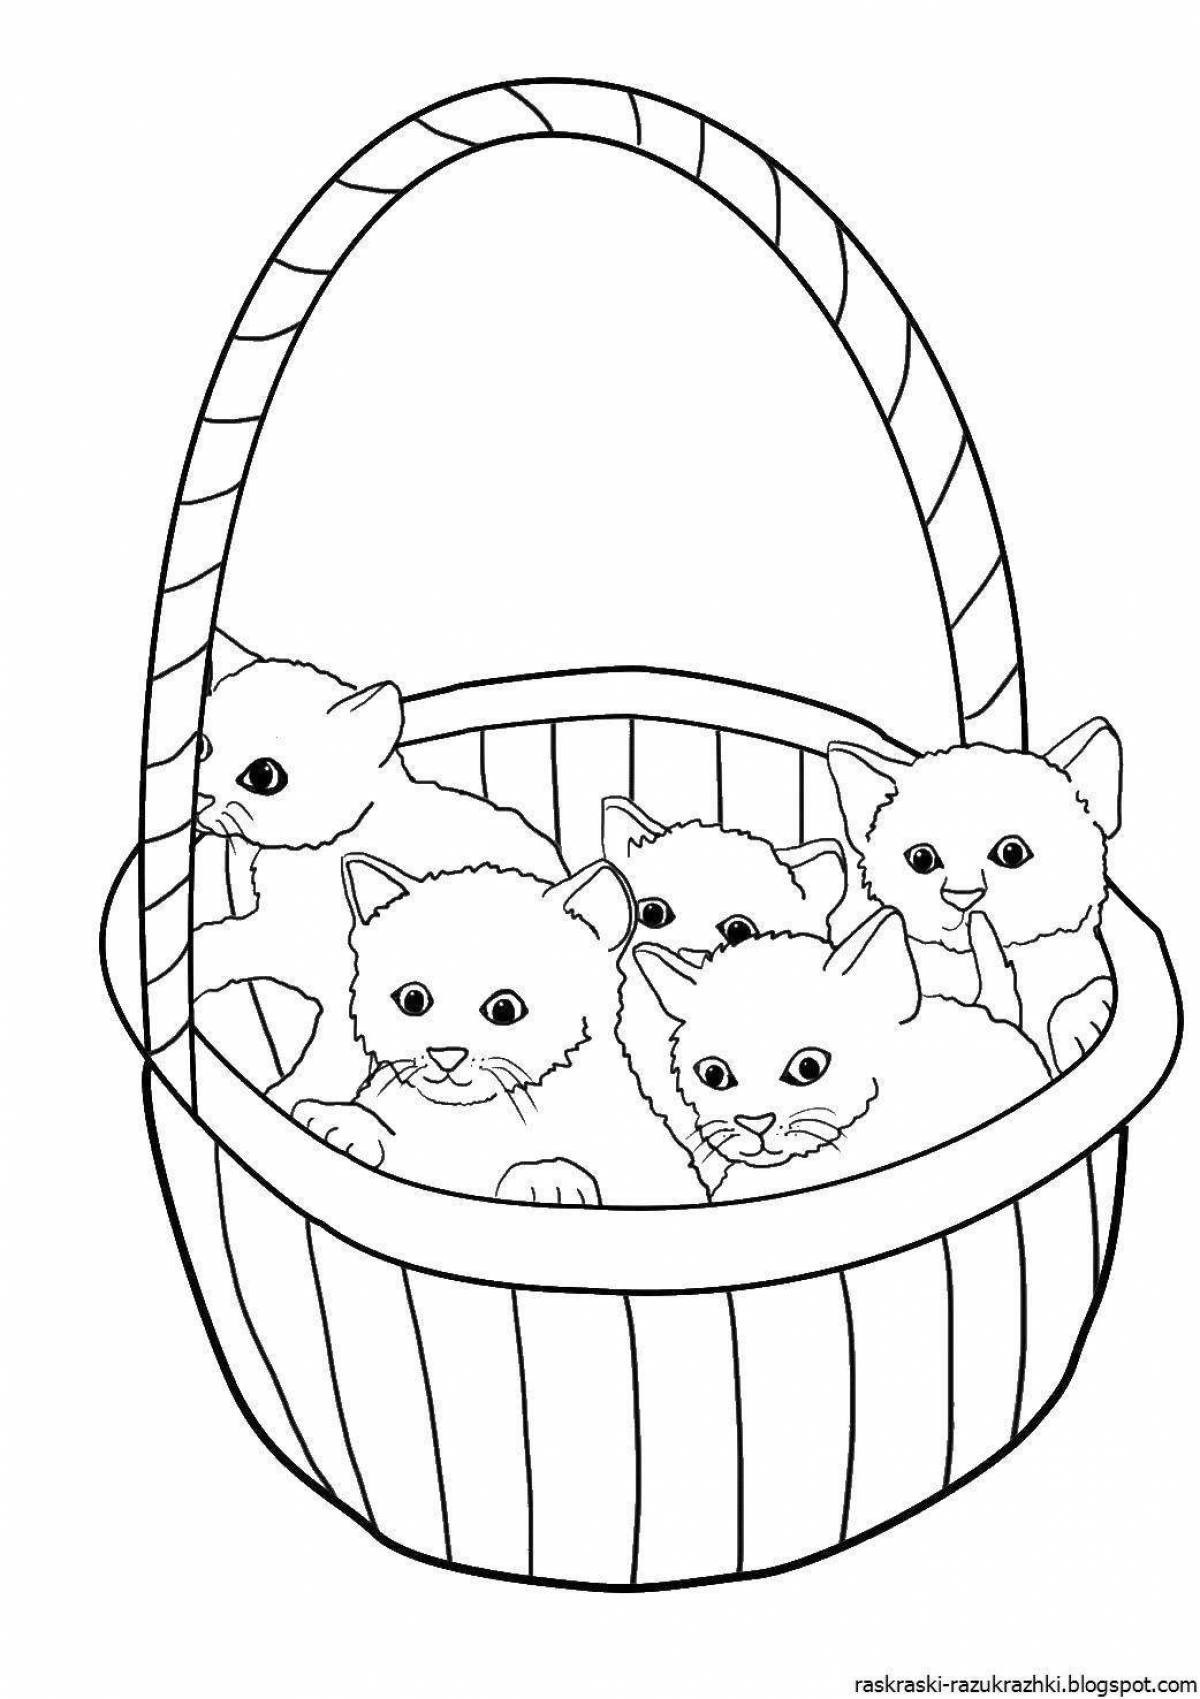 Snuggly coloring page cats for girls